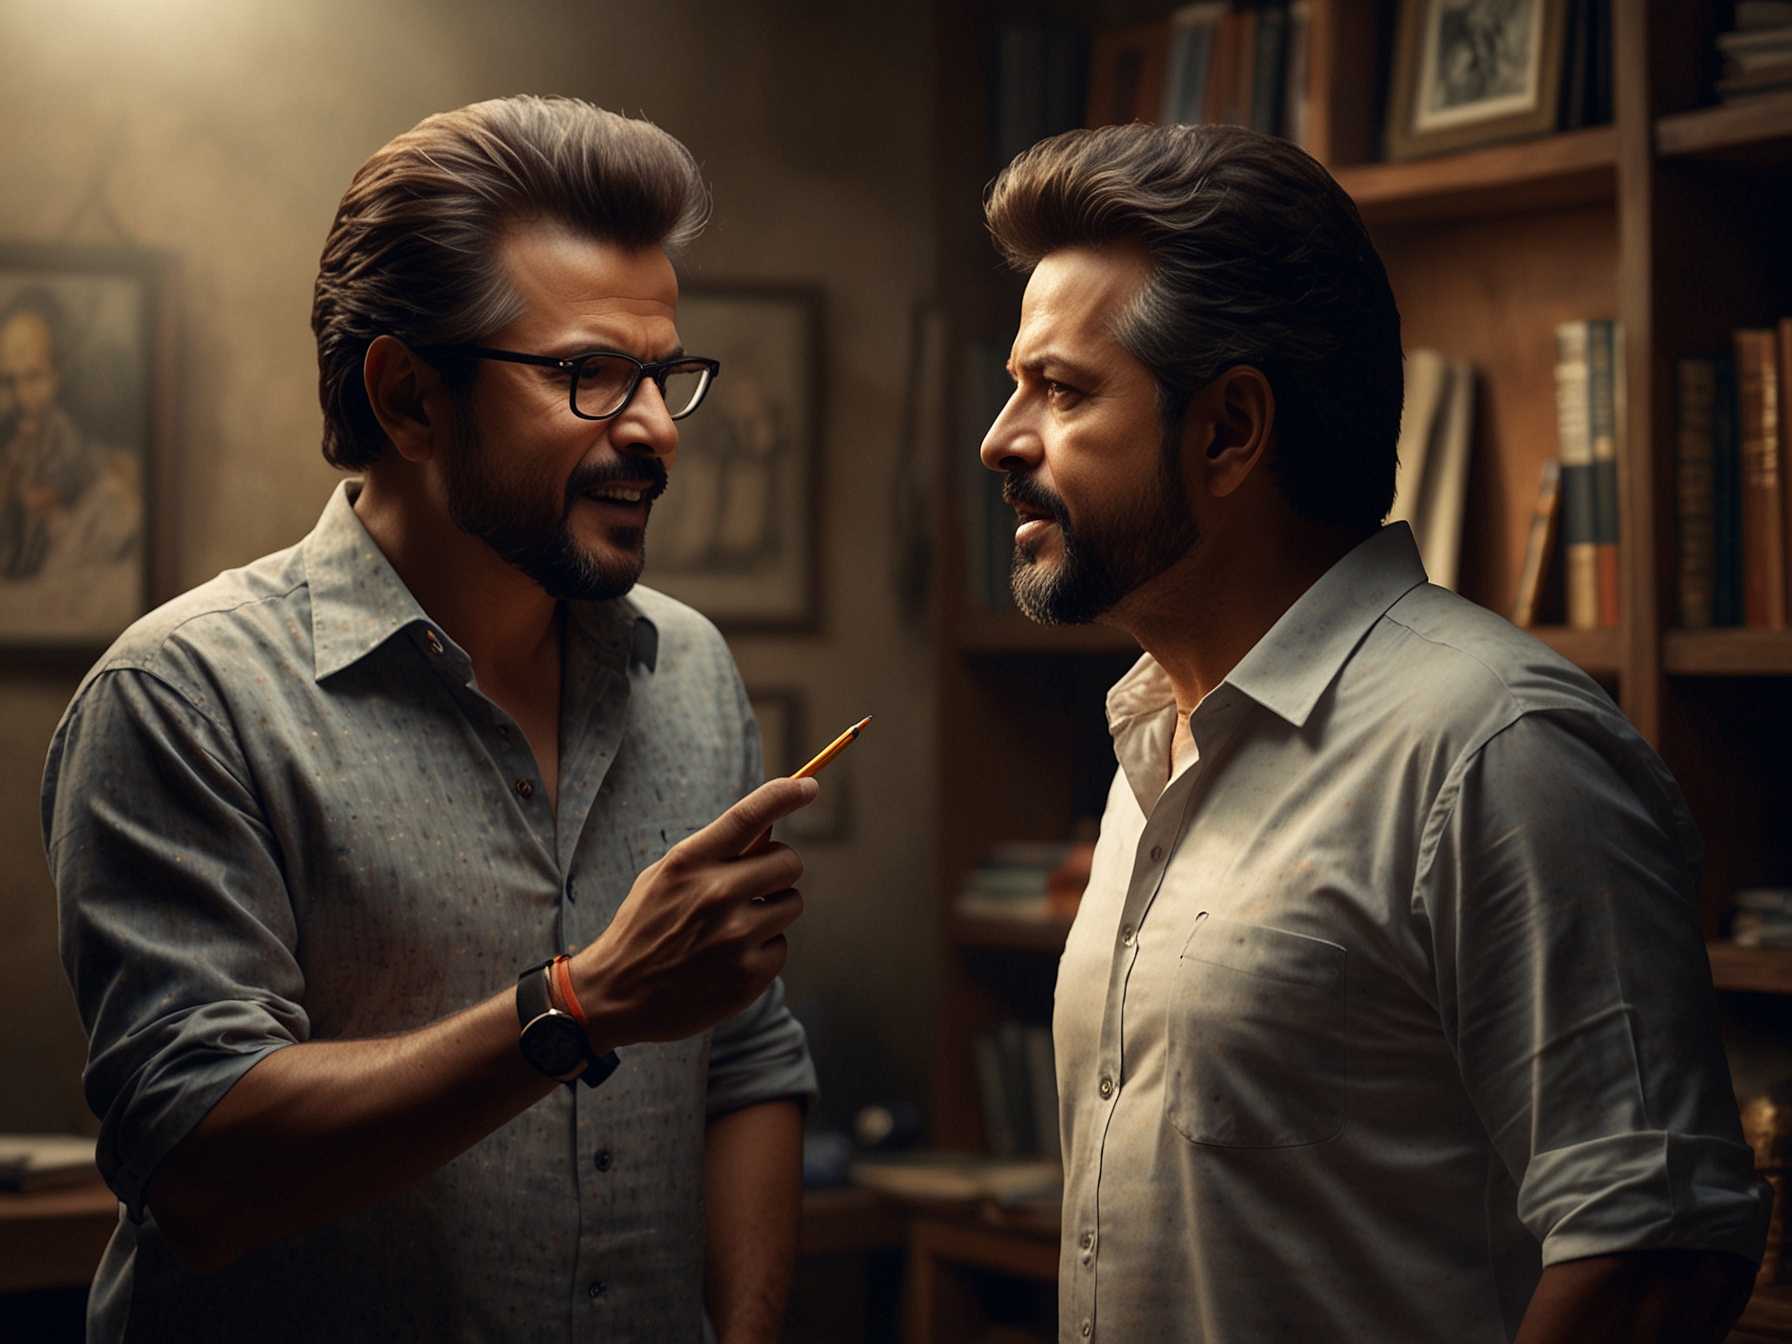 Anil Kapoor shares a candid behind-the-scenes shot from the set of Subedaar, showcasing the actor in deep discussion with director Suresh Triveni, amidst meticulous pre-production activities.